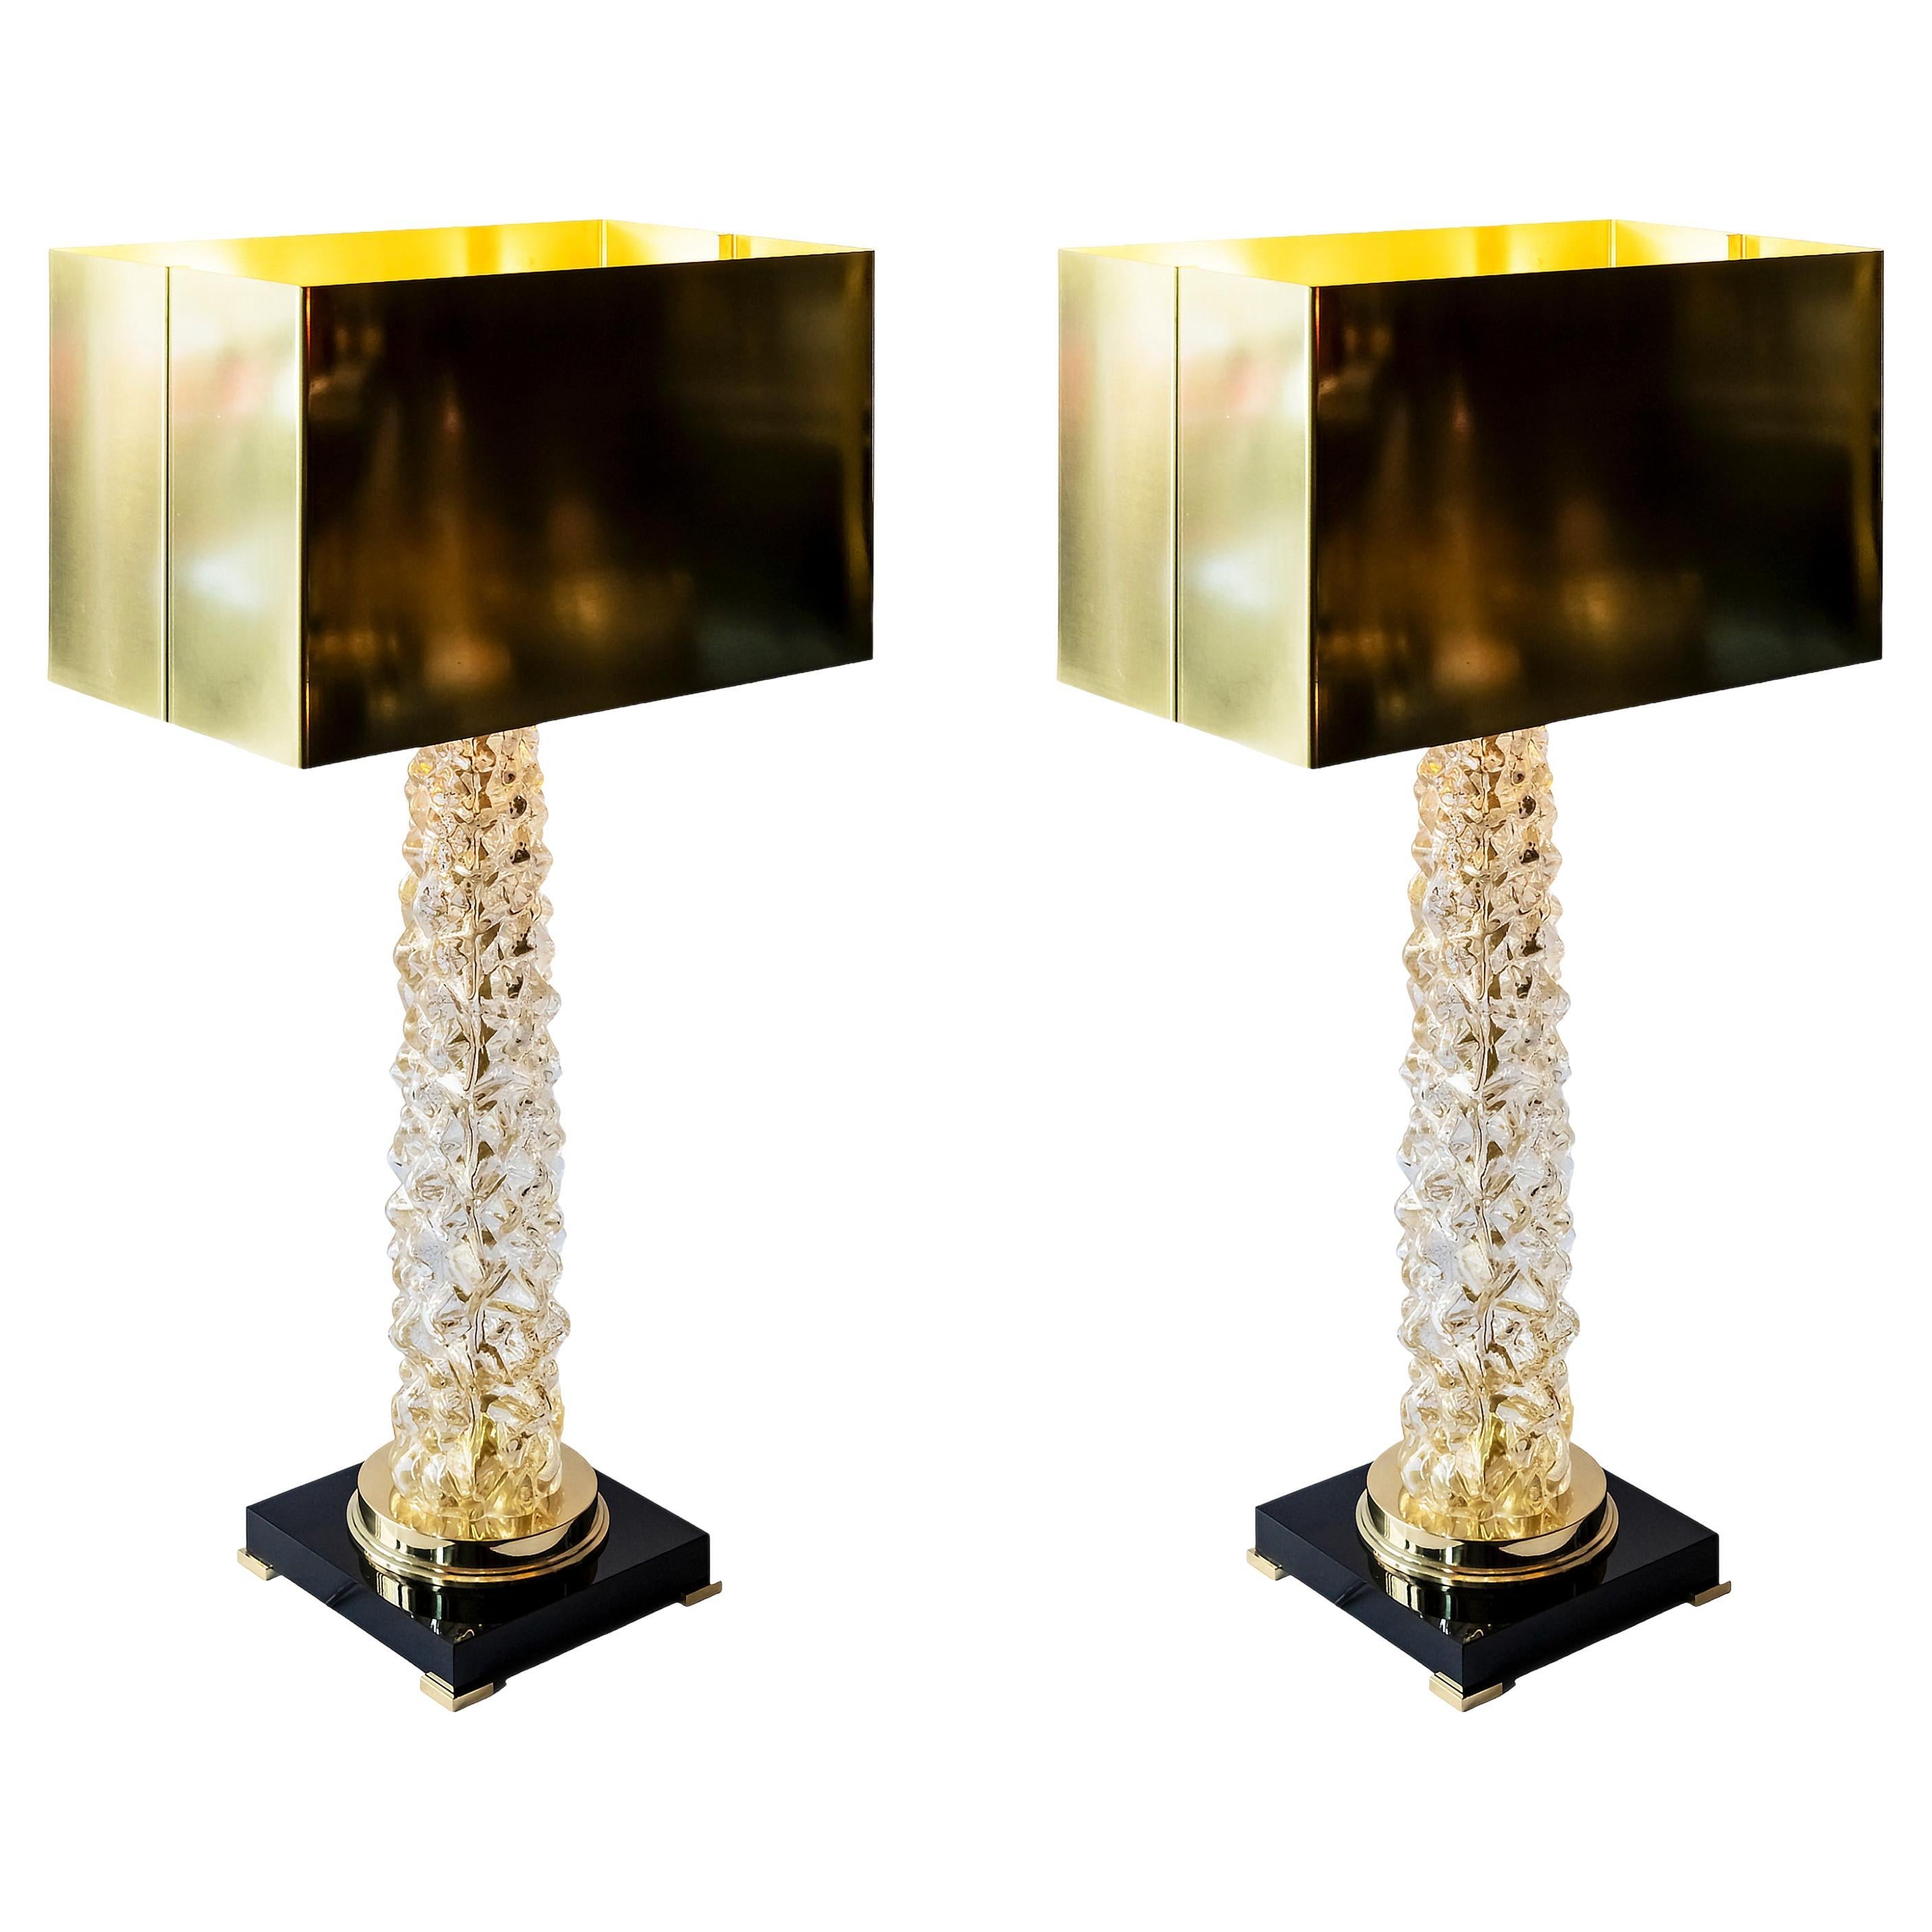 Pair of Italian Table Lamps in Murano Glass and Brass Shades